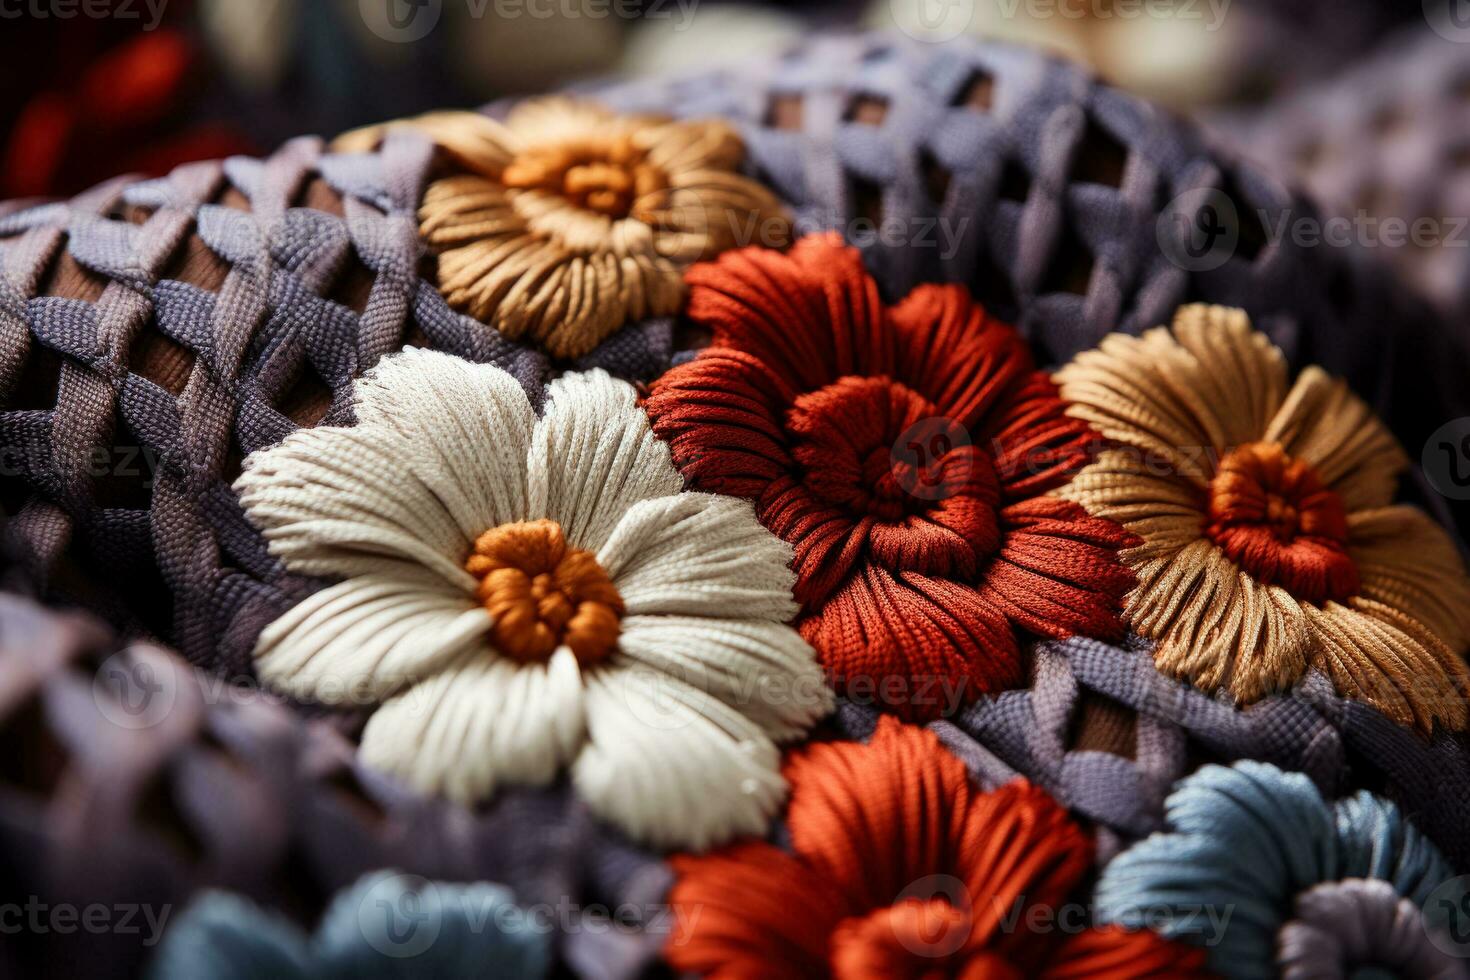 Intricate woven patterns of Jacquard fabric captured in detailed close up photo